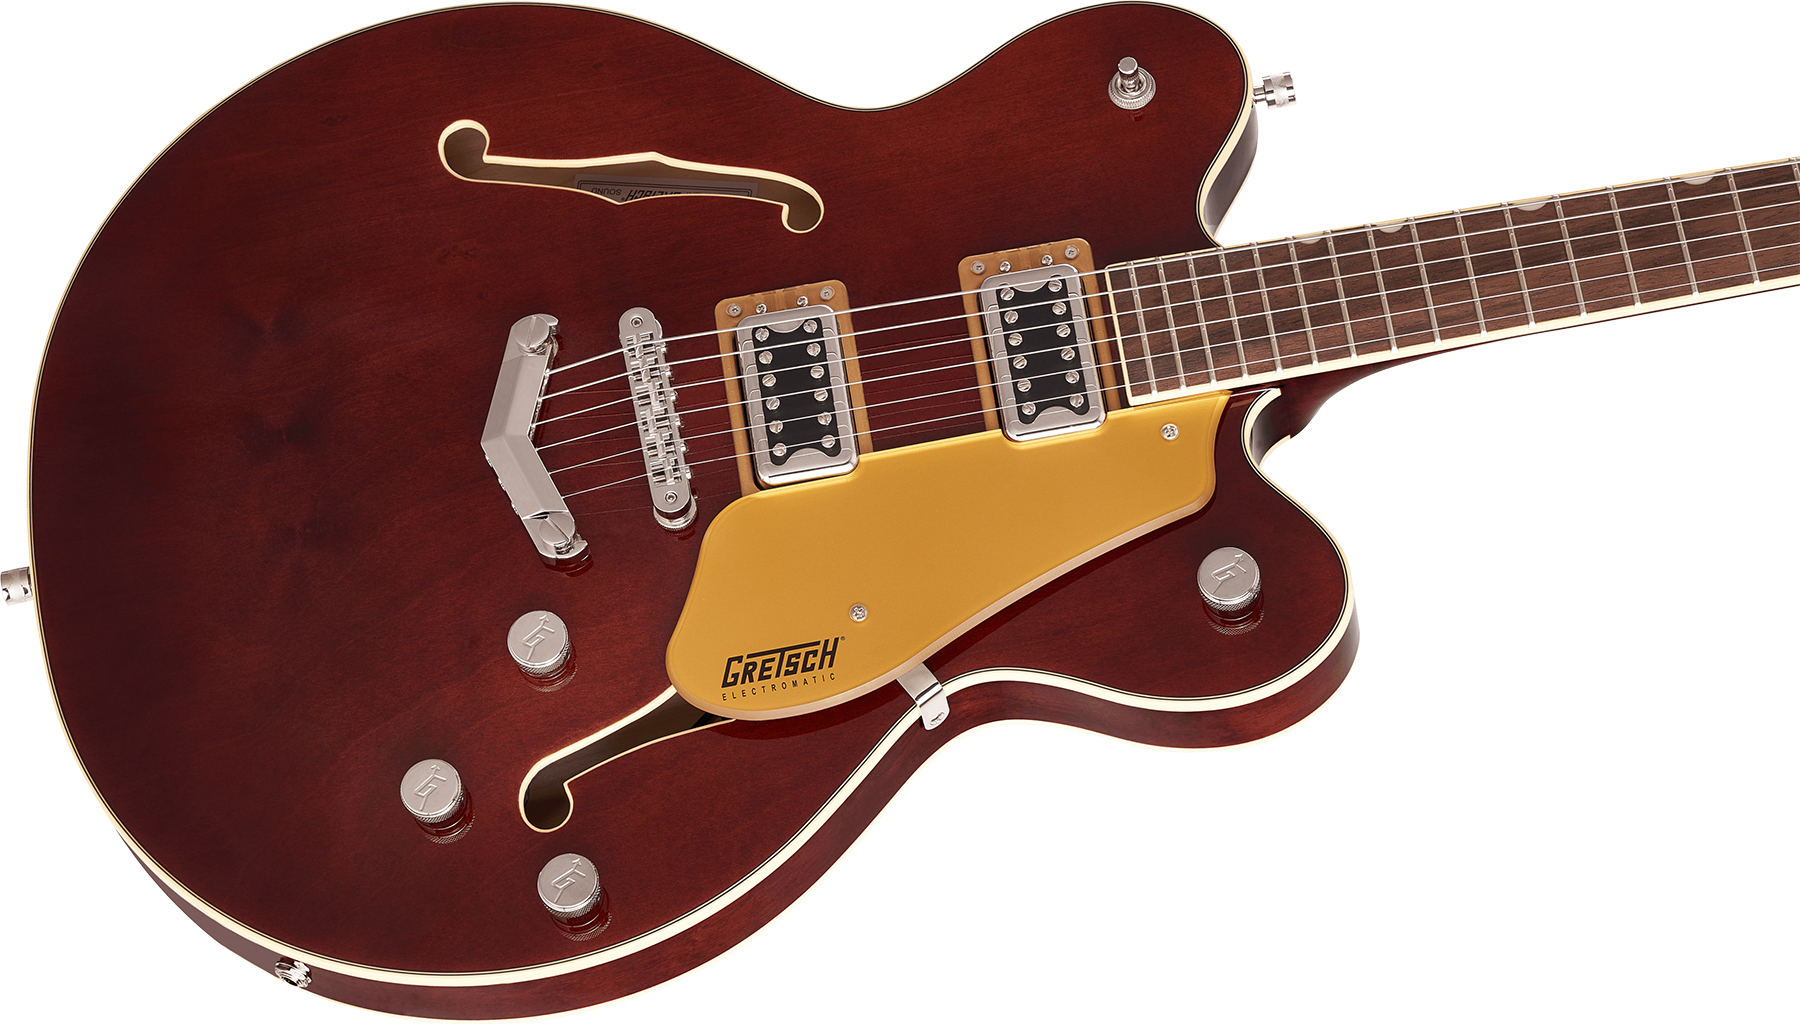 Gretsch G5622 Center Bloc Double Cut V-stoptail Electromatic Hh Ht Lau - Aged Walnut - Semi-hollow electric guitar - Variation 2